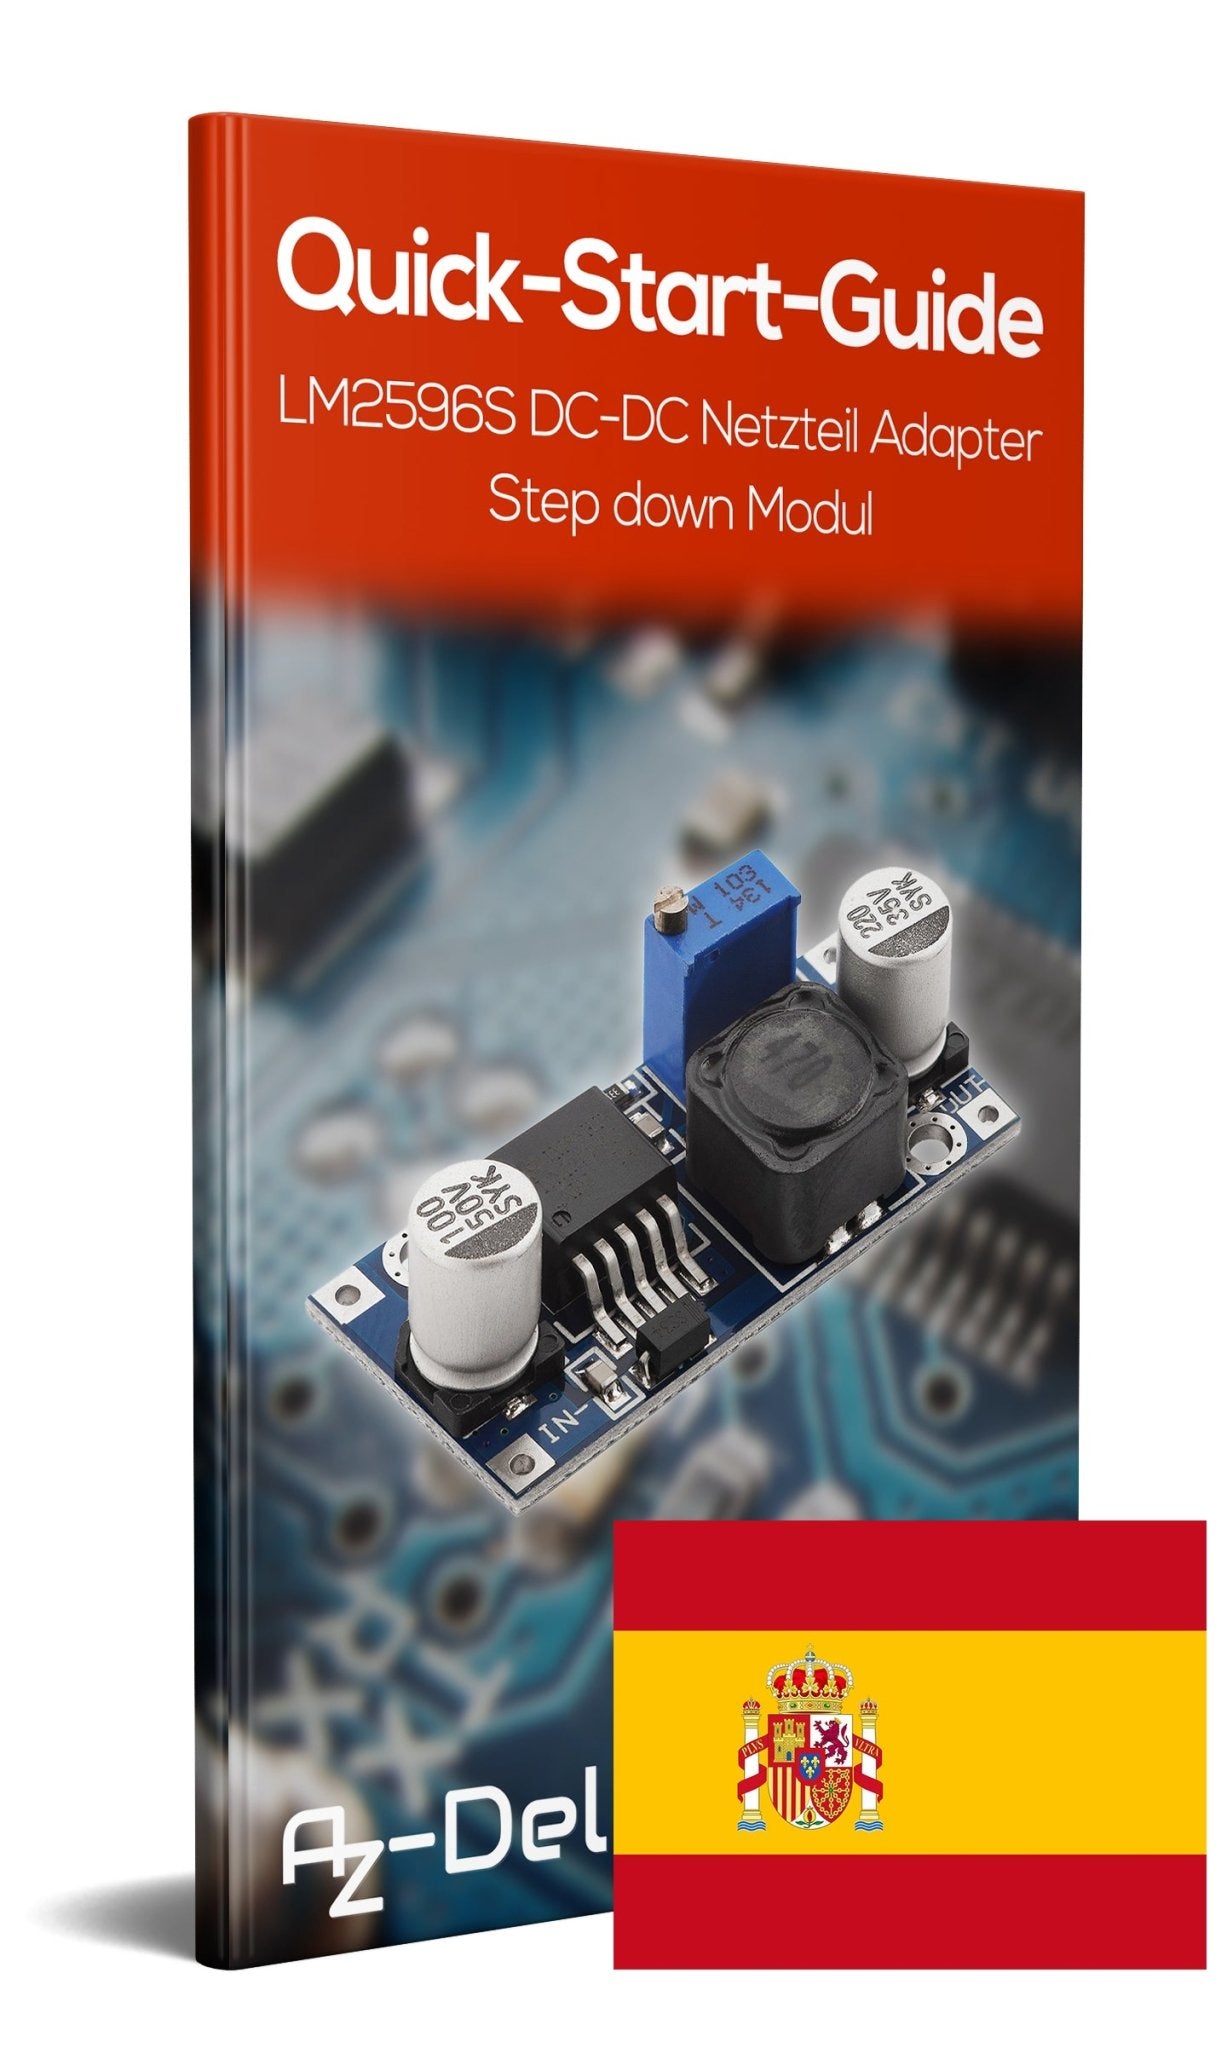 LM2596S DC-DC Netzteil Adapter Step down Modul - AZ-Delivery